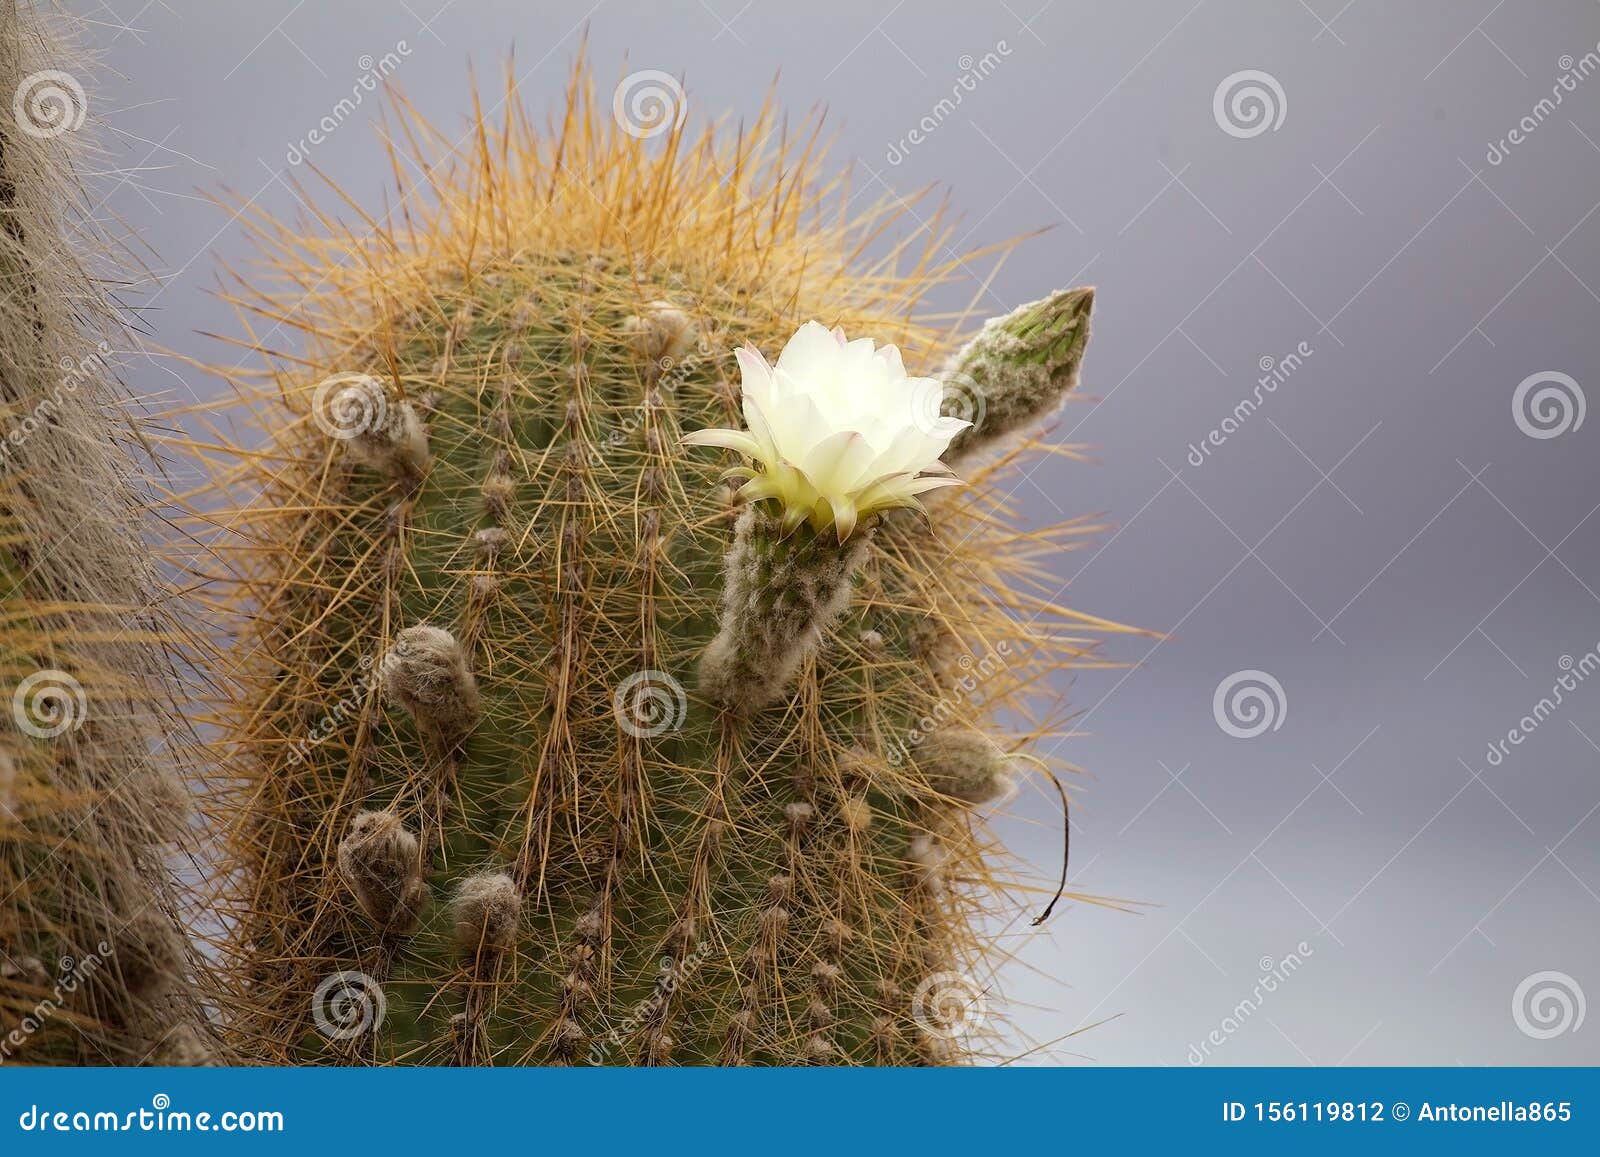 Flowers of the Cardon Cactus at the Los Cardones National Park ...